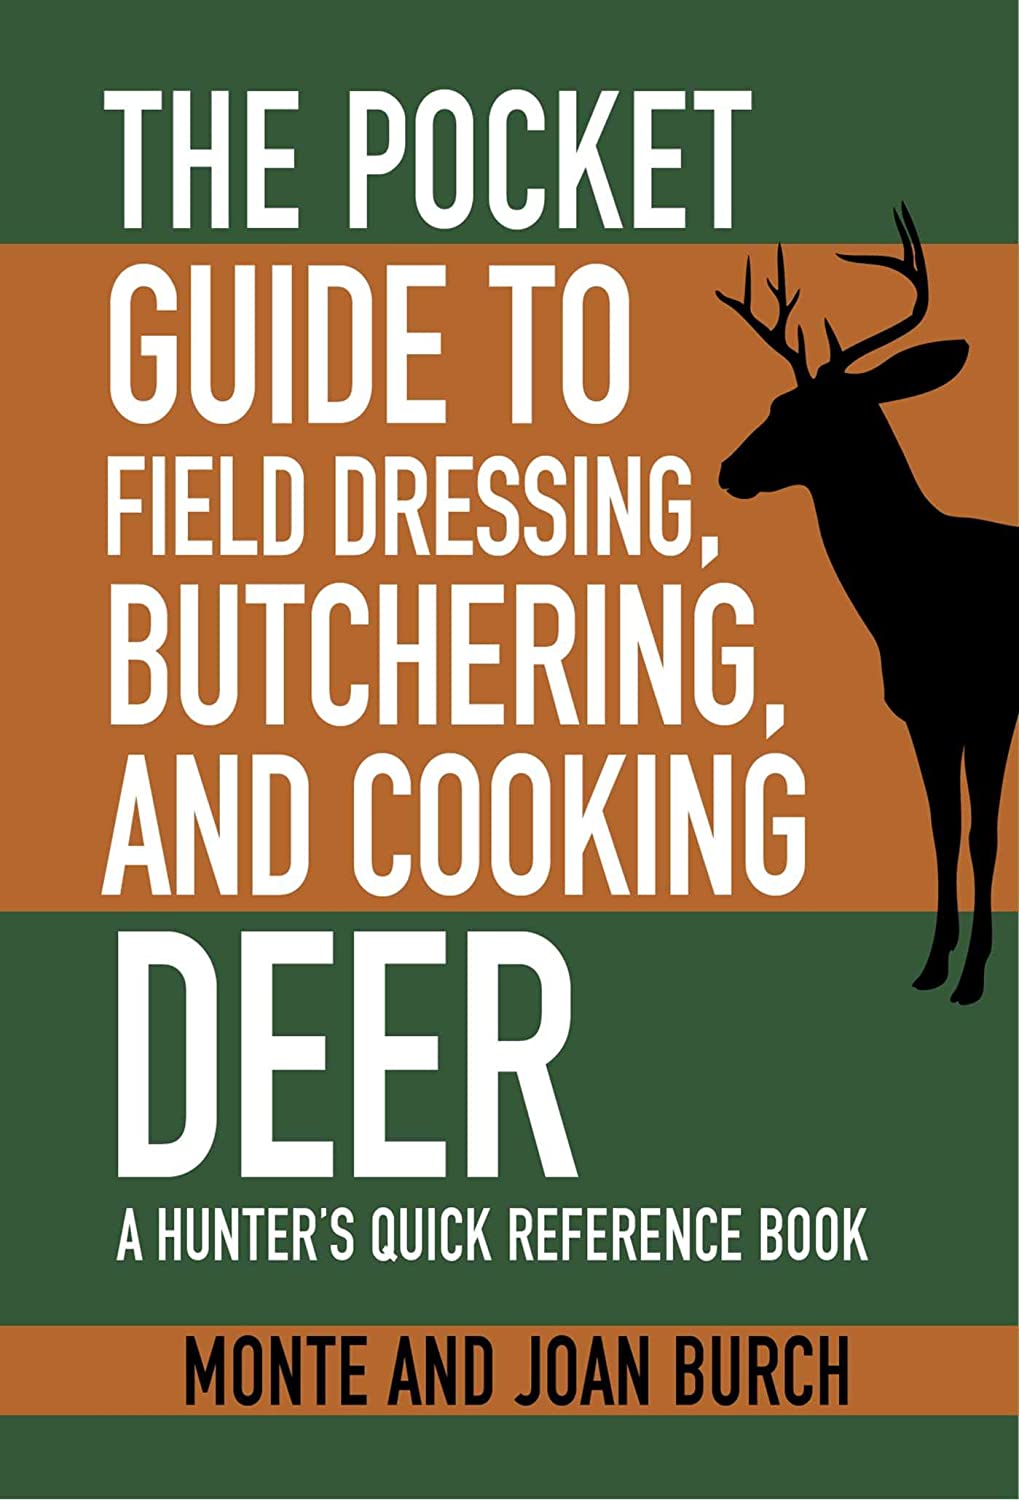 The Pocket Guide to Field Dressing, Butchering, and Cooking Deer: A Hunter’s Quick Reference Book (Skyhorse Pocket Guides)